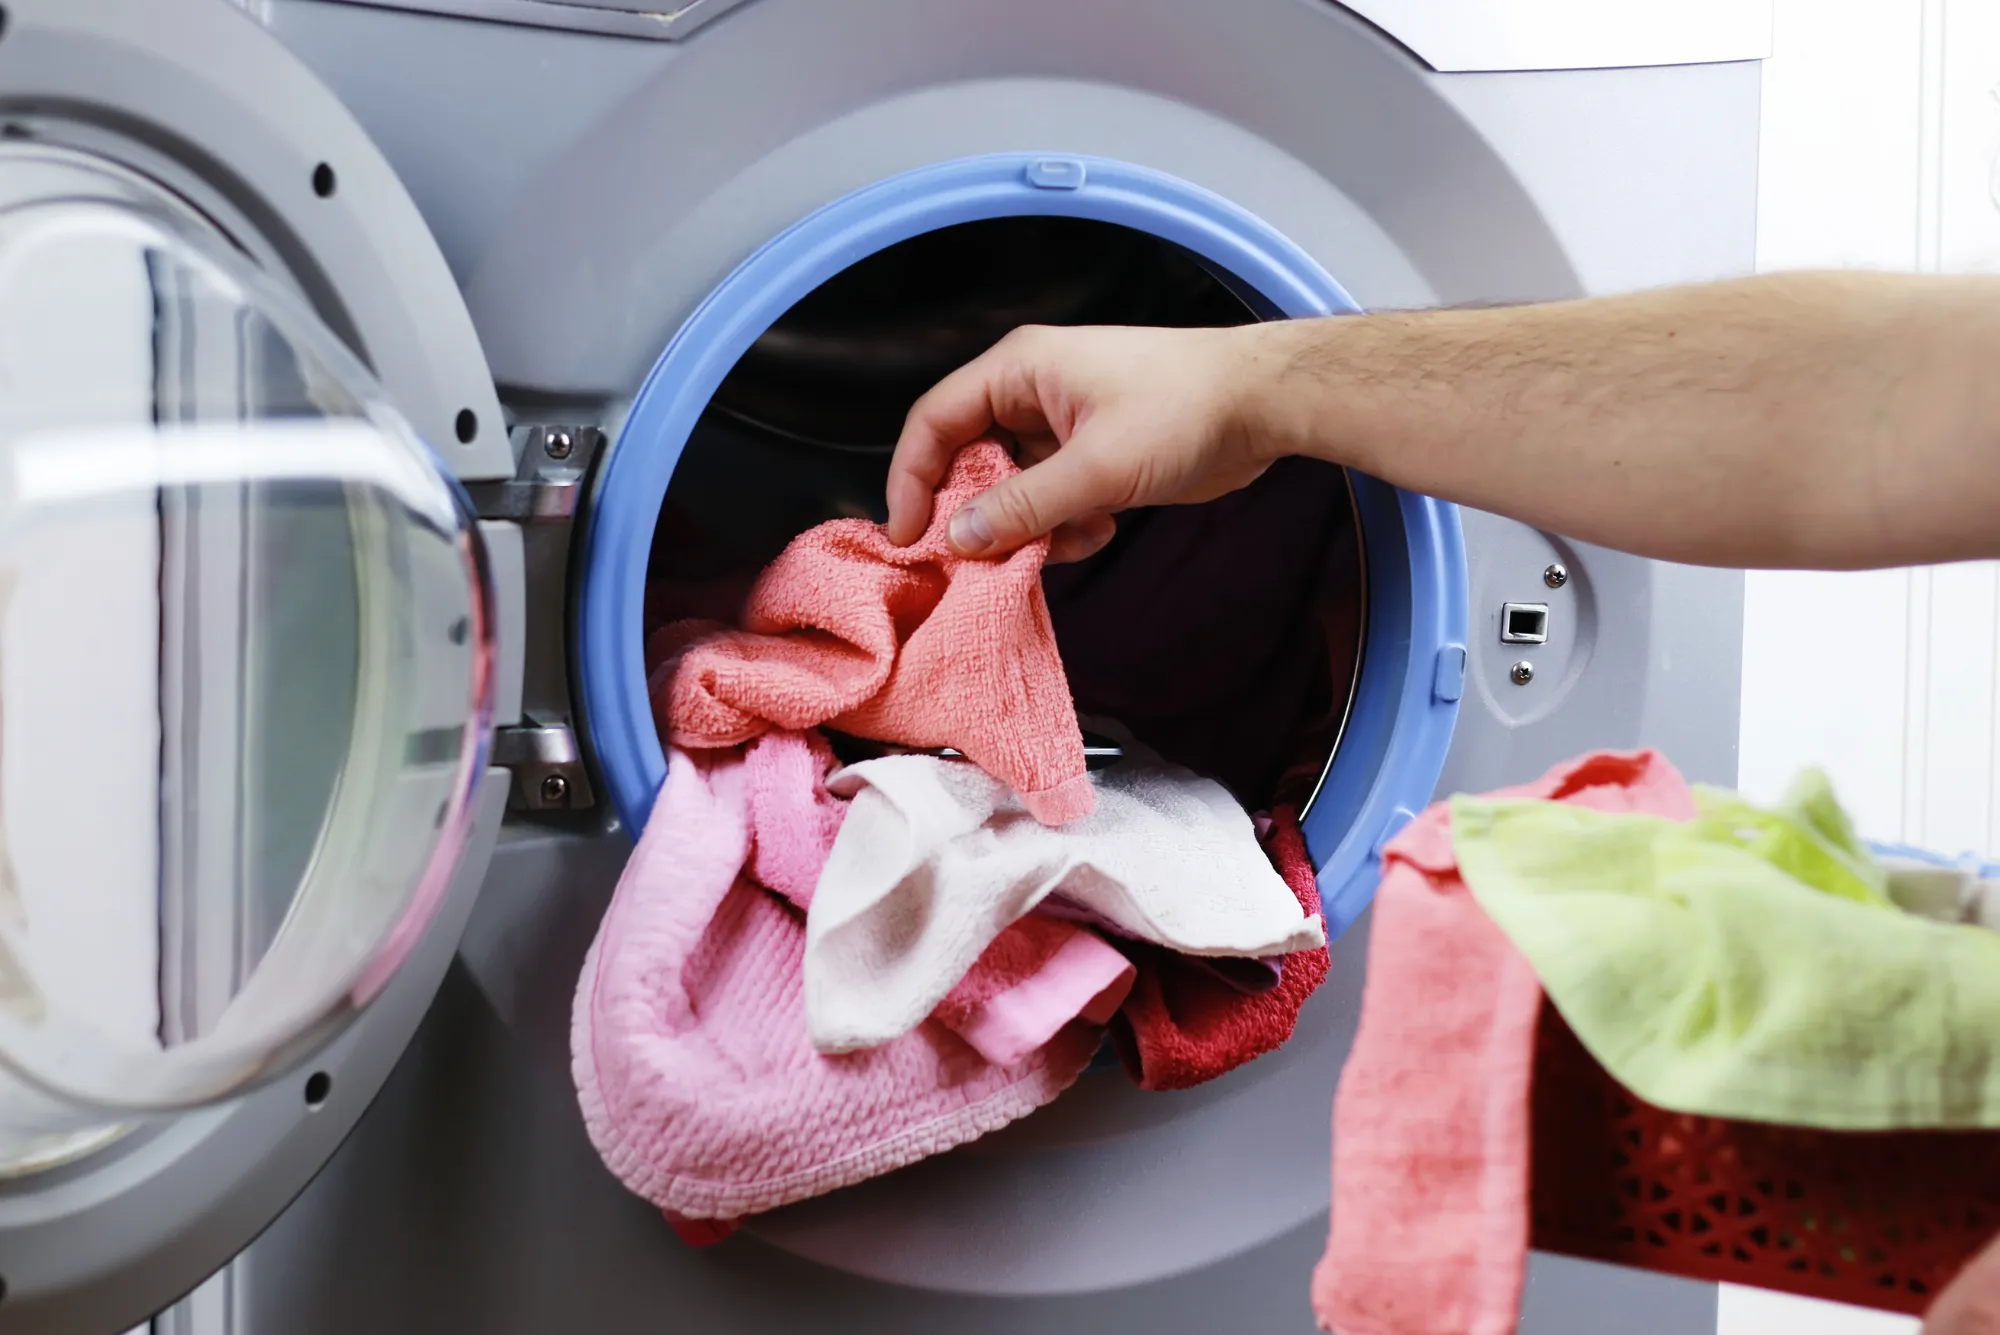 Tips for preventing clothes from getting tangled in the washer